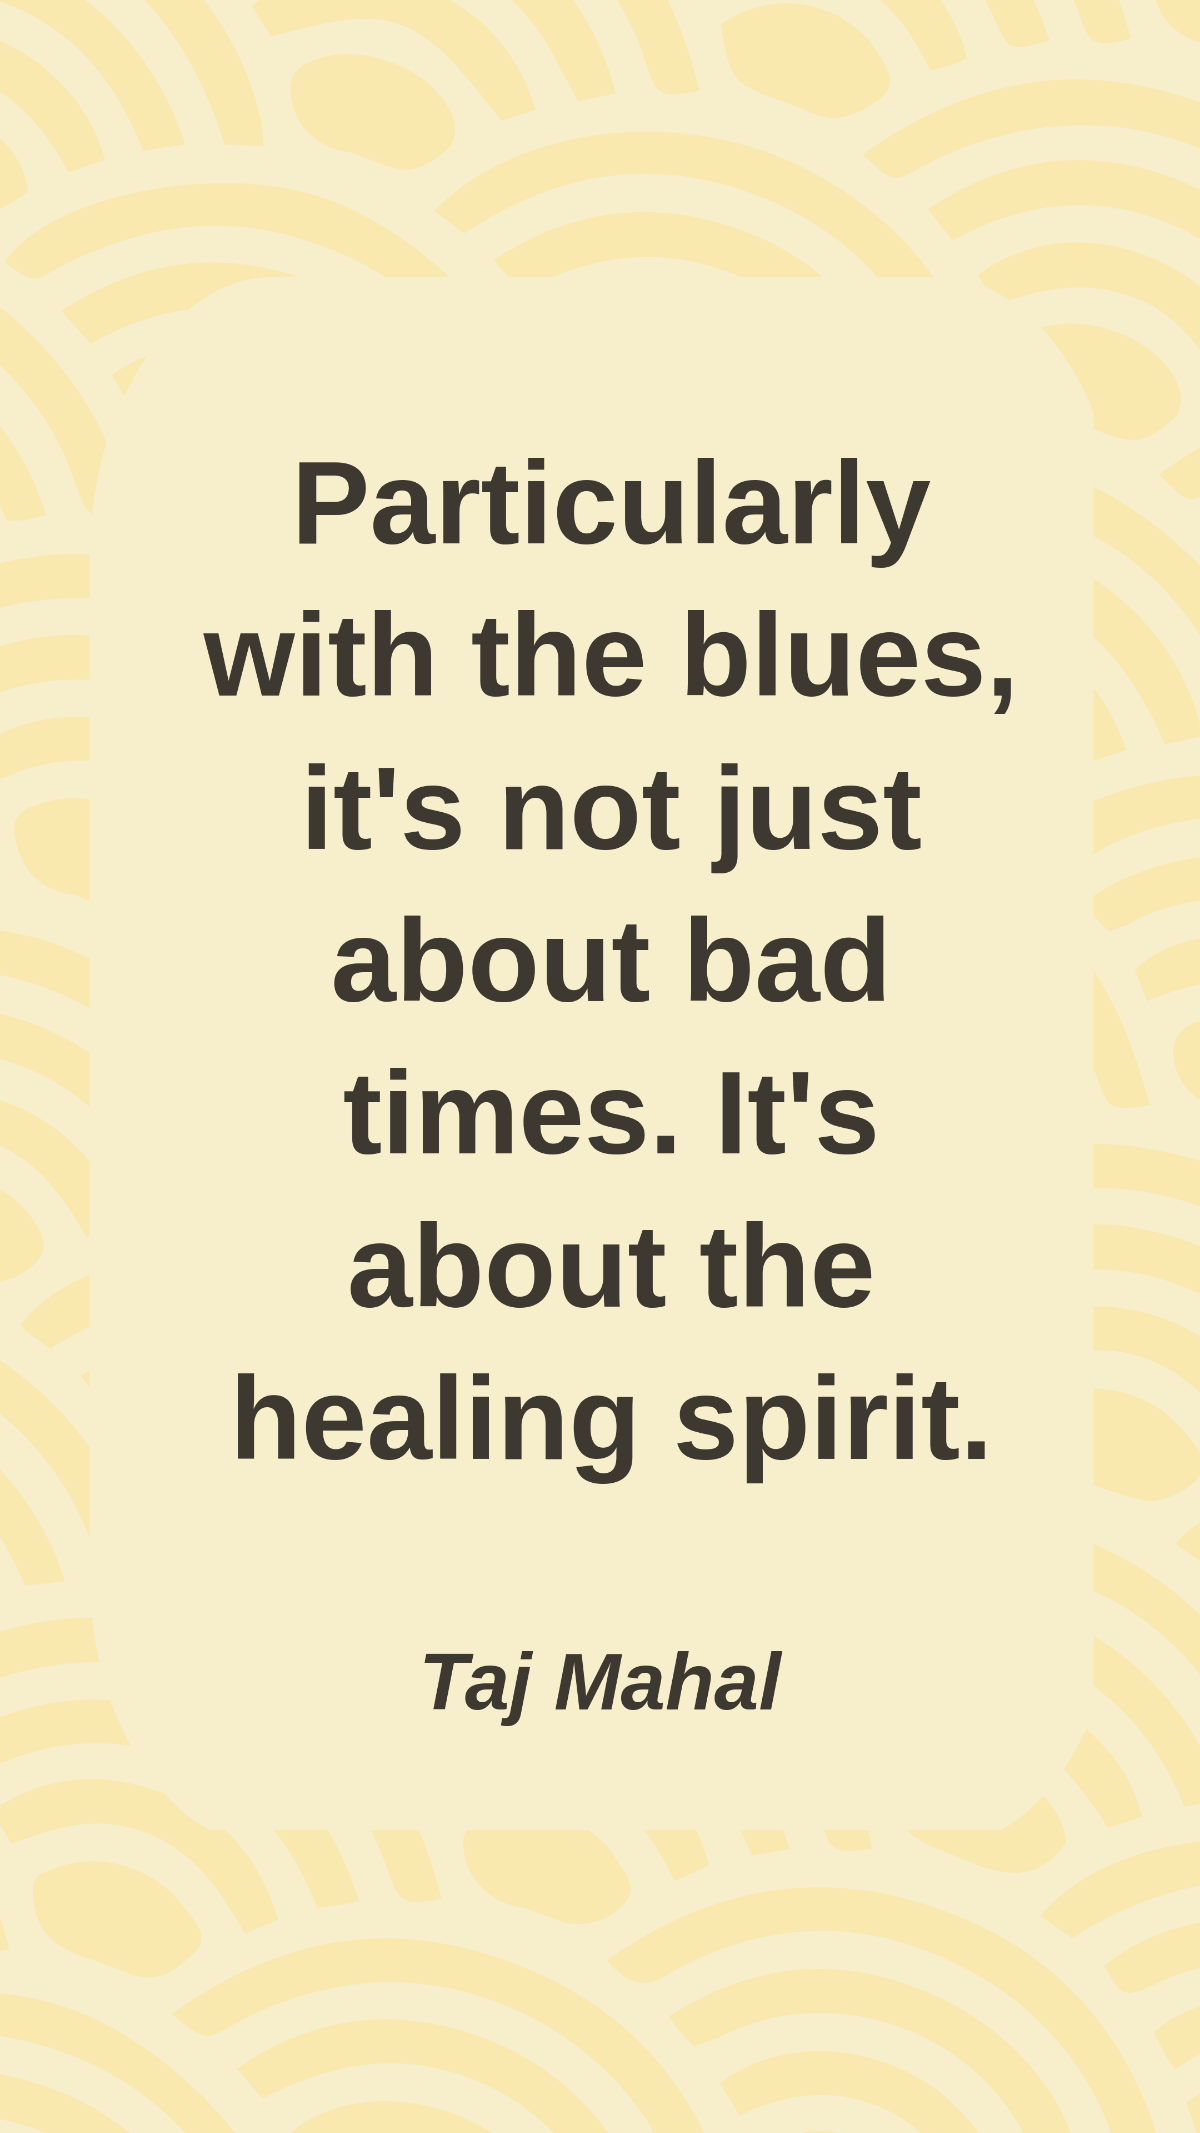 Taj Mahal - Particularly with the blues, it's not just about bad times. It's about the healing spirit. Template